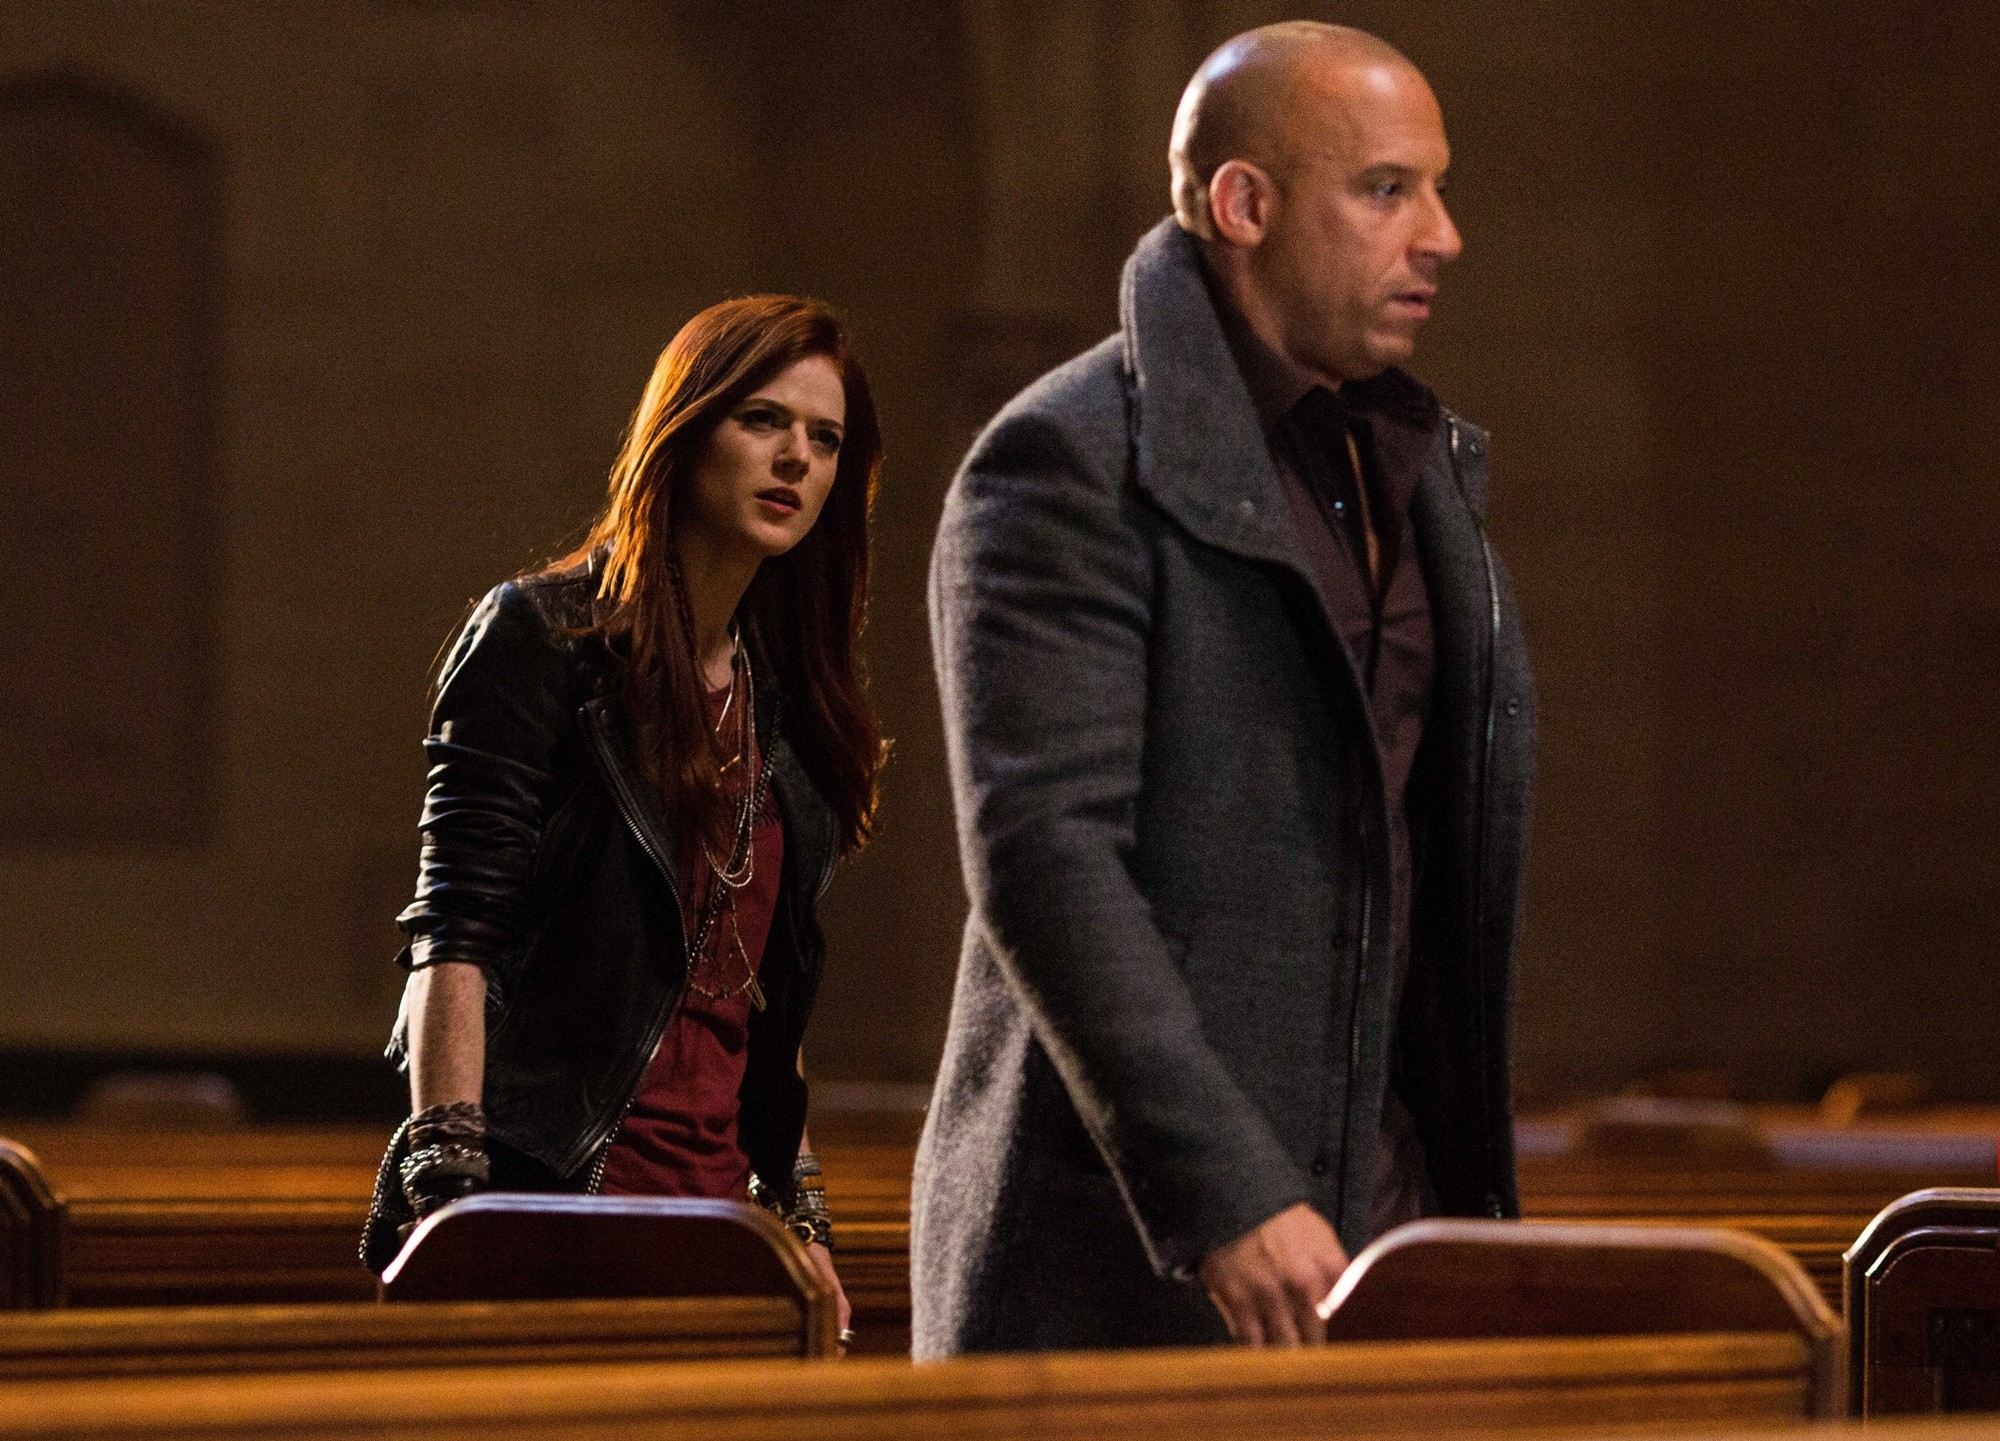 Rose Leslie stars as Chloe and Vin Diesel stars as Kaulder in Summit Entertainment's The Last Witch Hunter (2015)